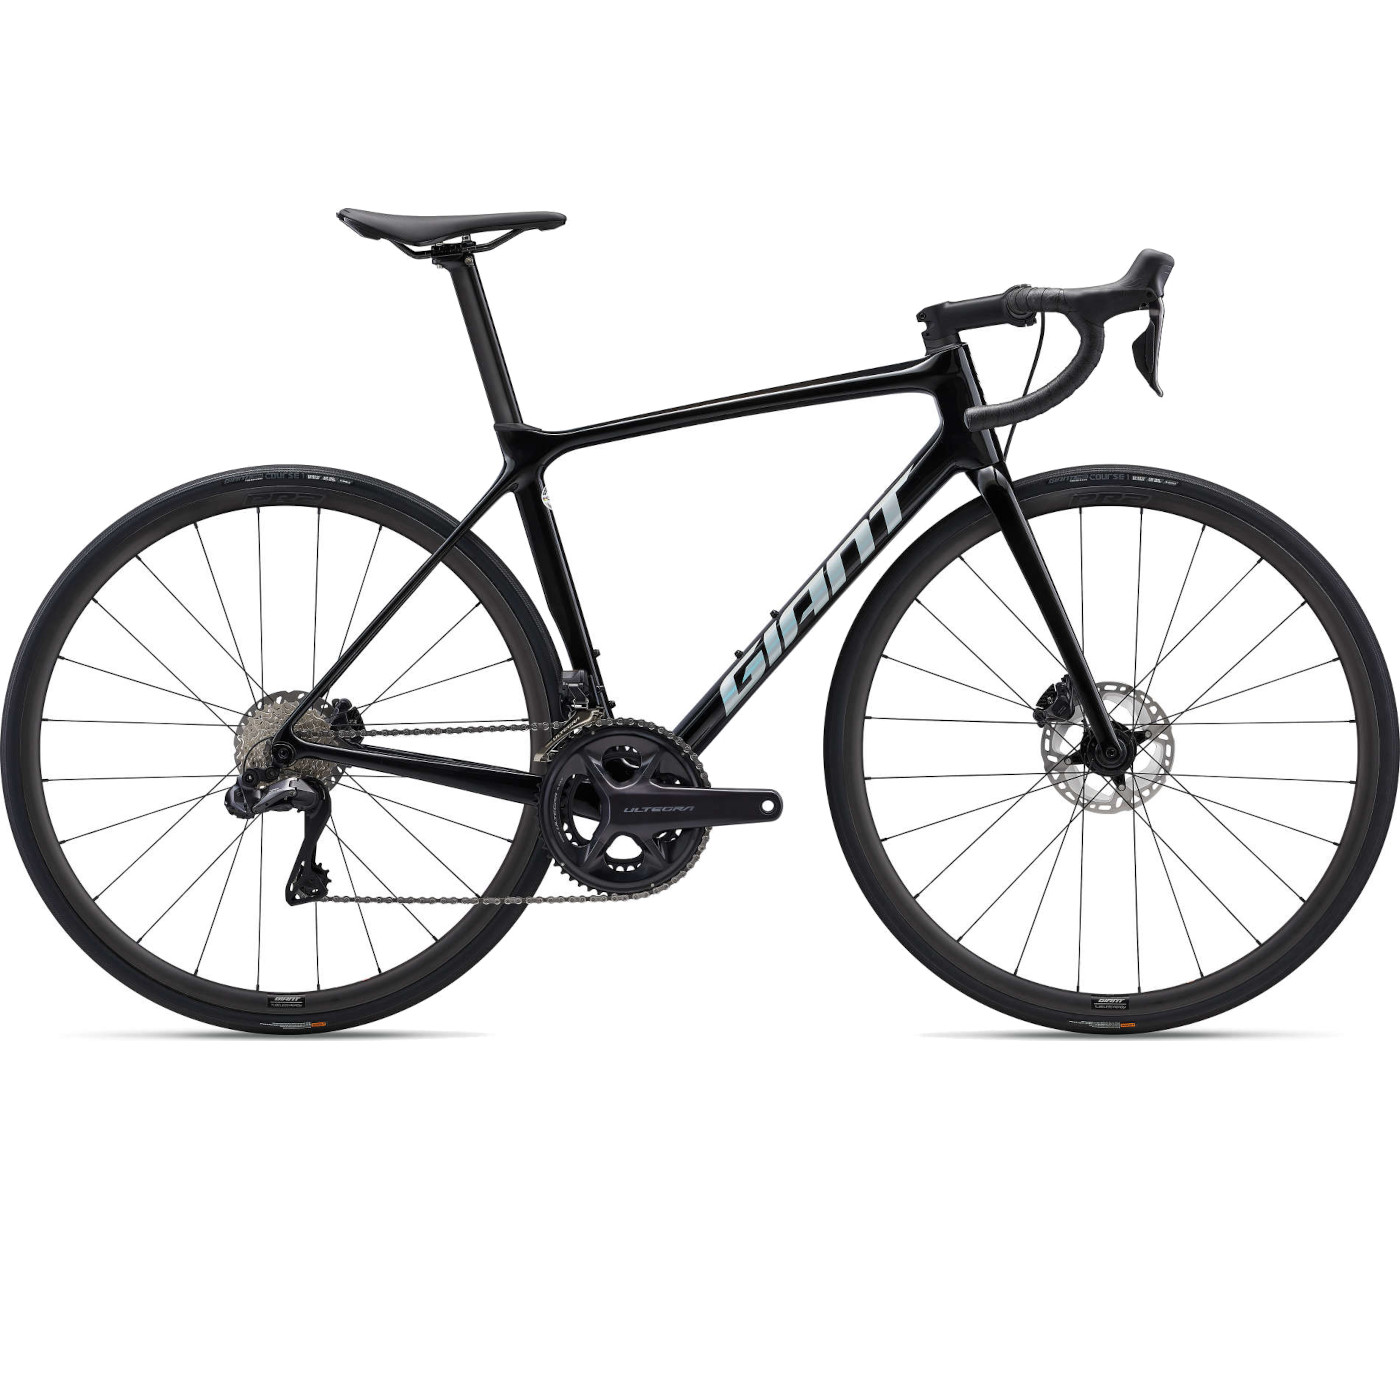 Picture of Giant TCR ADVANCED 0 - Ultegra Di2 Carbon Road Bike - 2022 - carbon